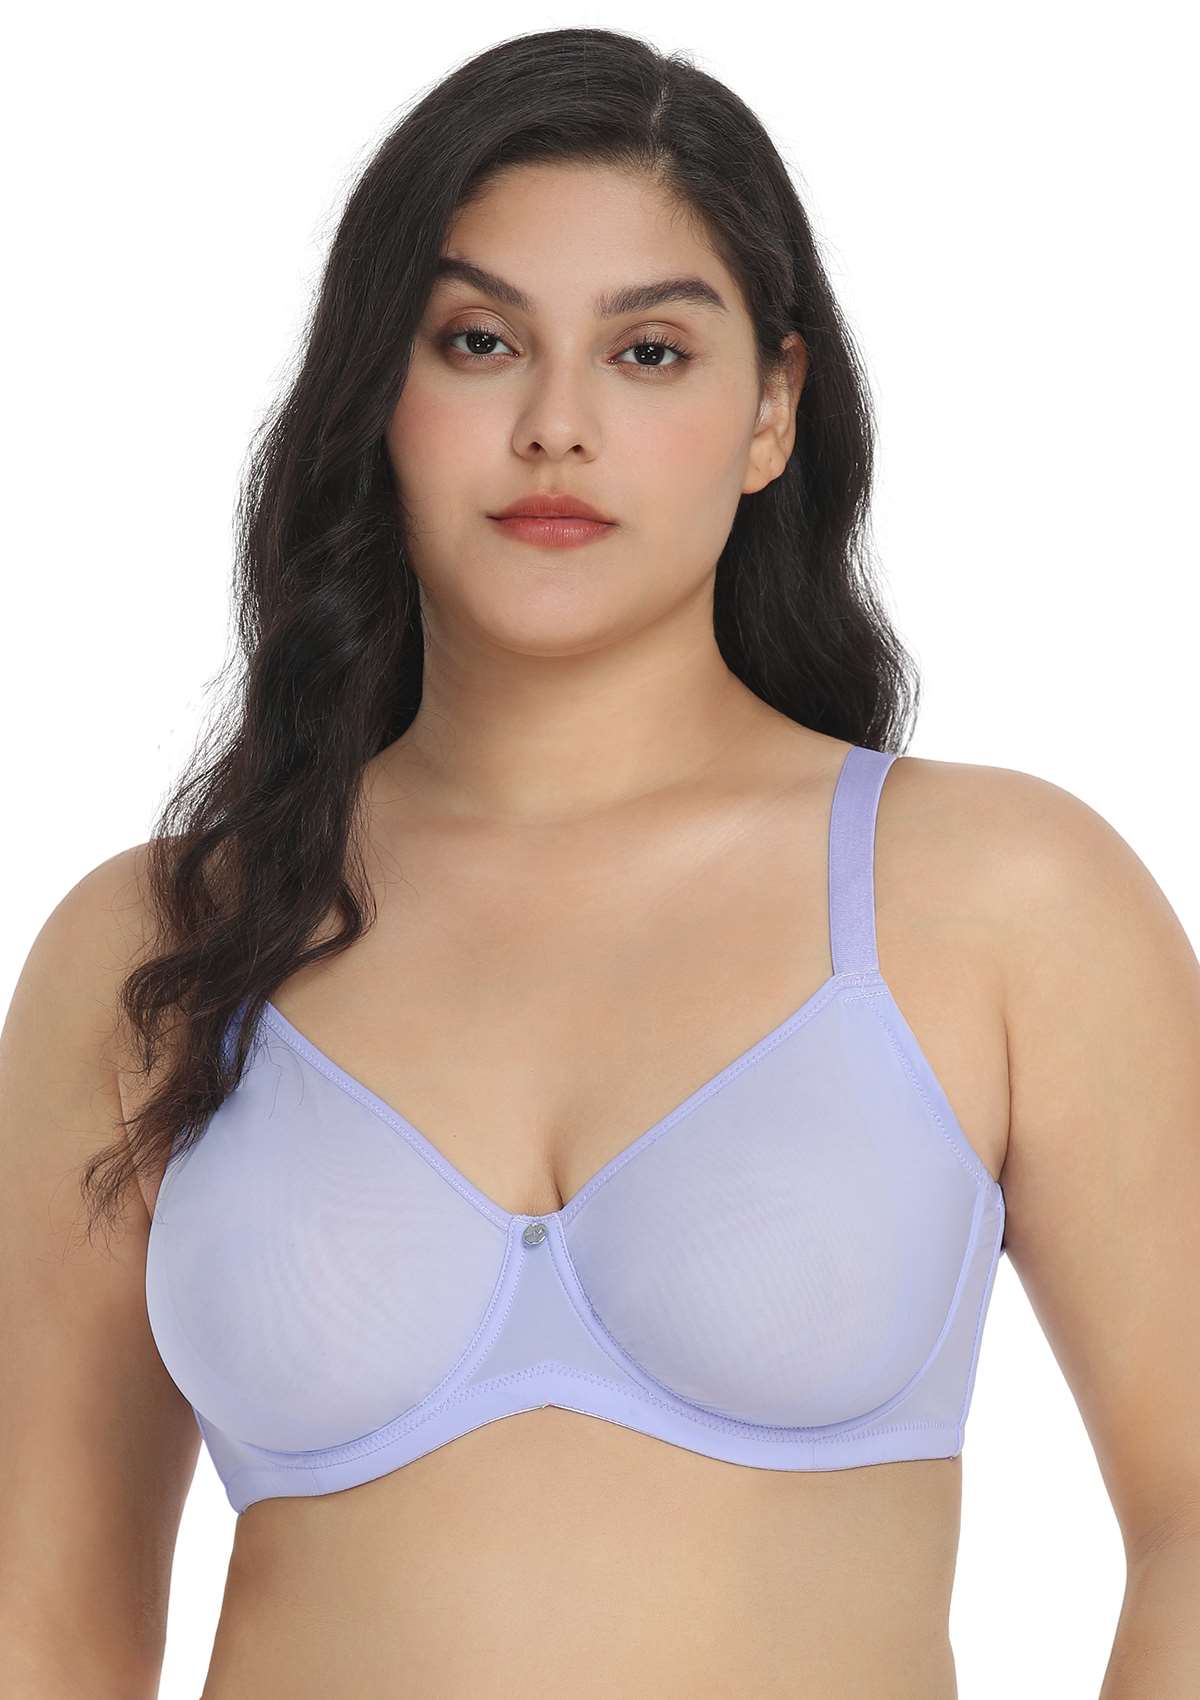 HSIA Marquita Ultimate Comfort Unlined Mesh Sheer Airy Underwire Bra - 40 / D / Black